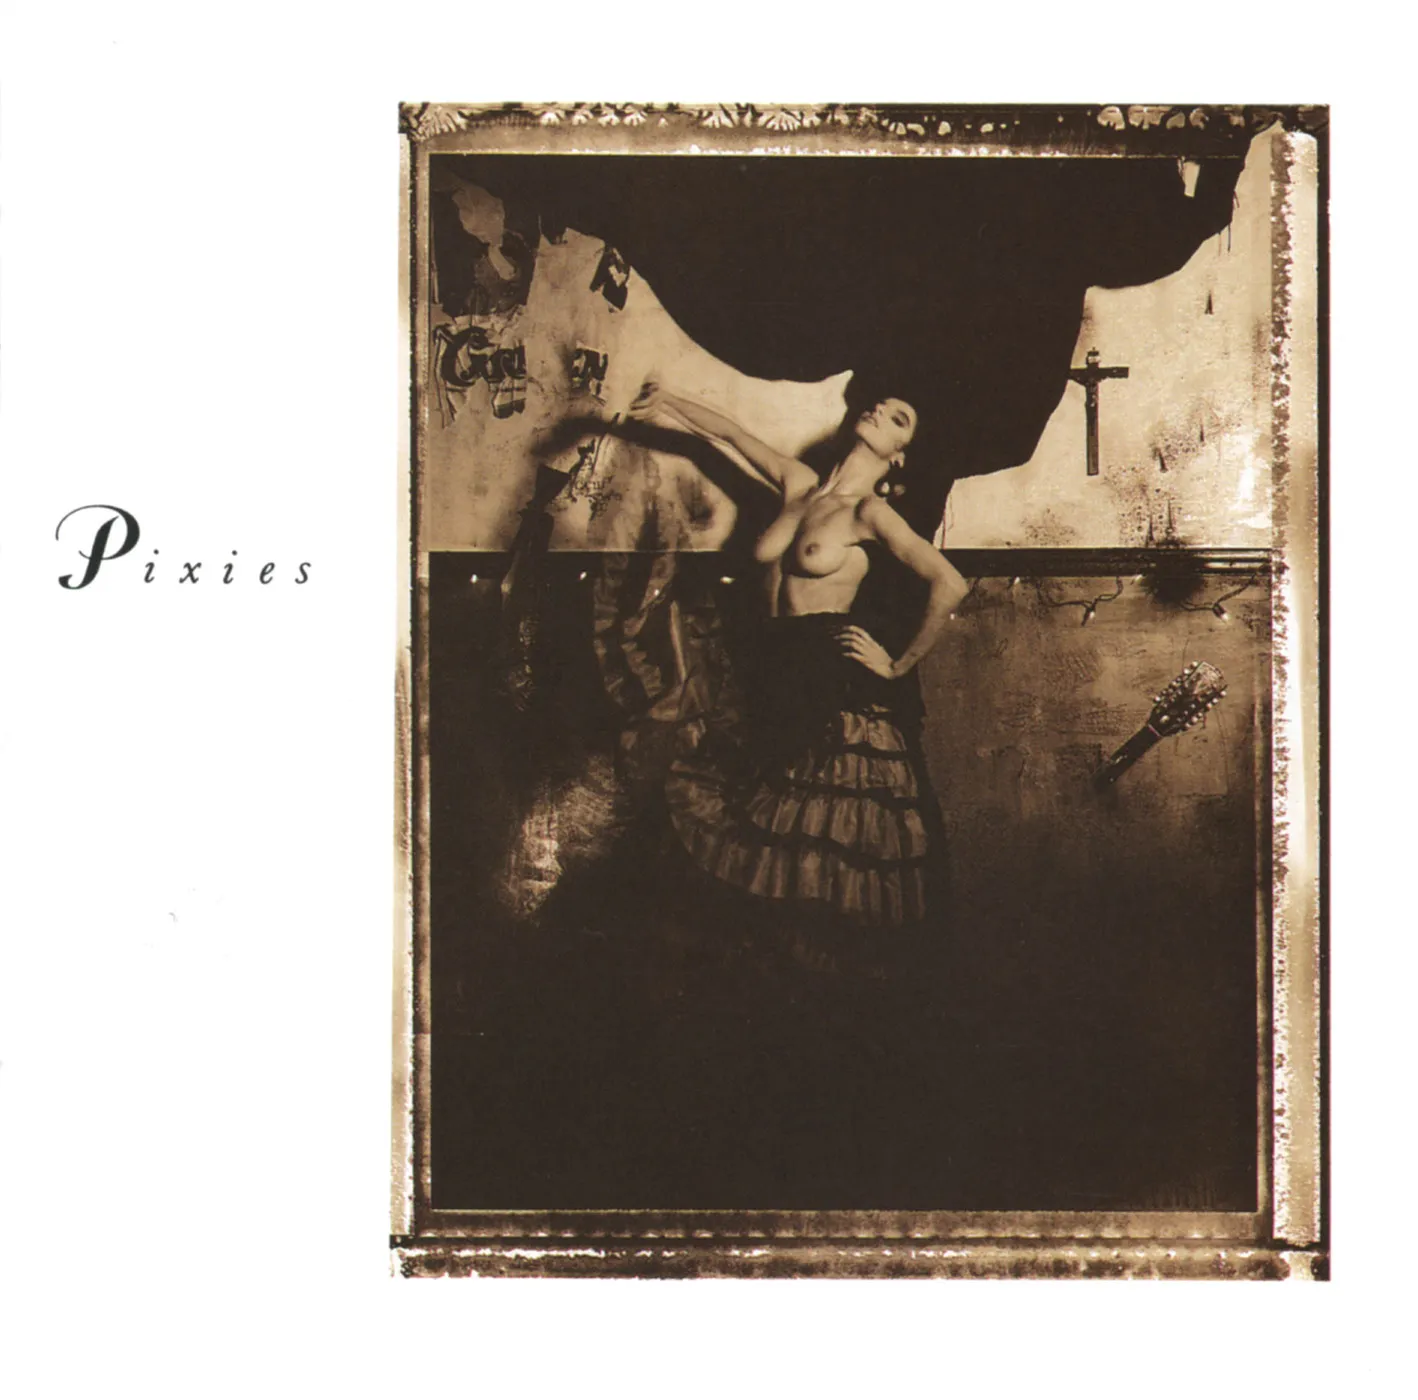 <strong>Pixies - Surfer Rosa / Come On Pilgrim CD</strong> (Cd)